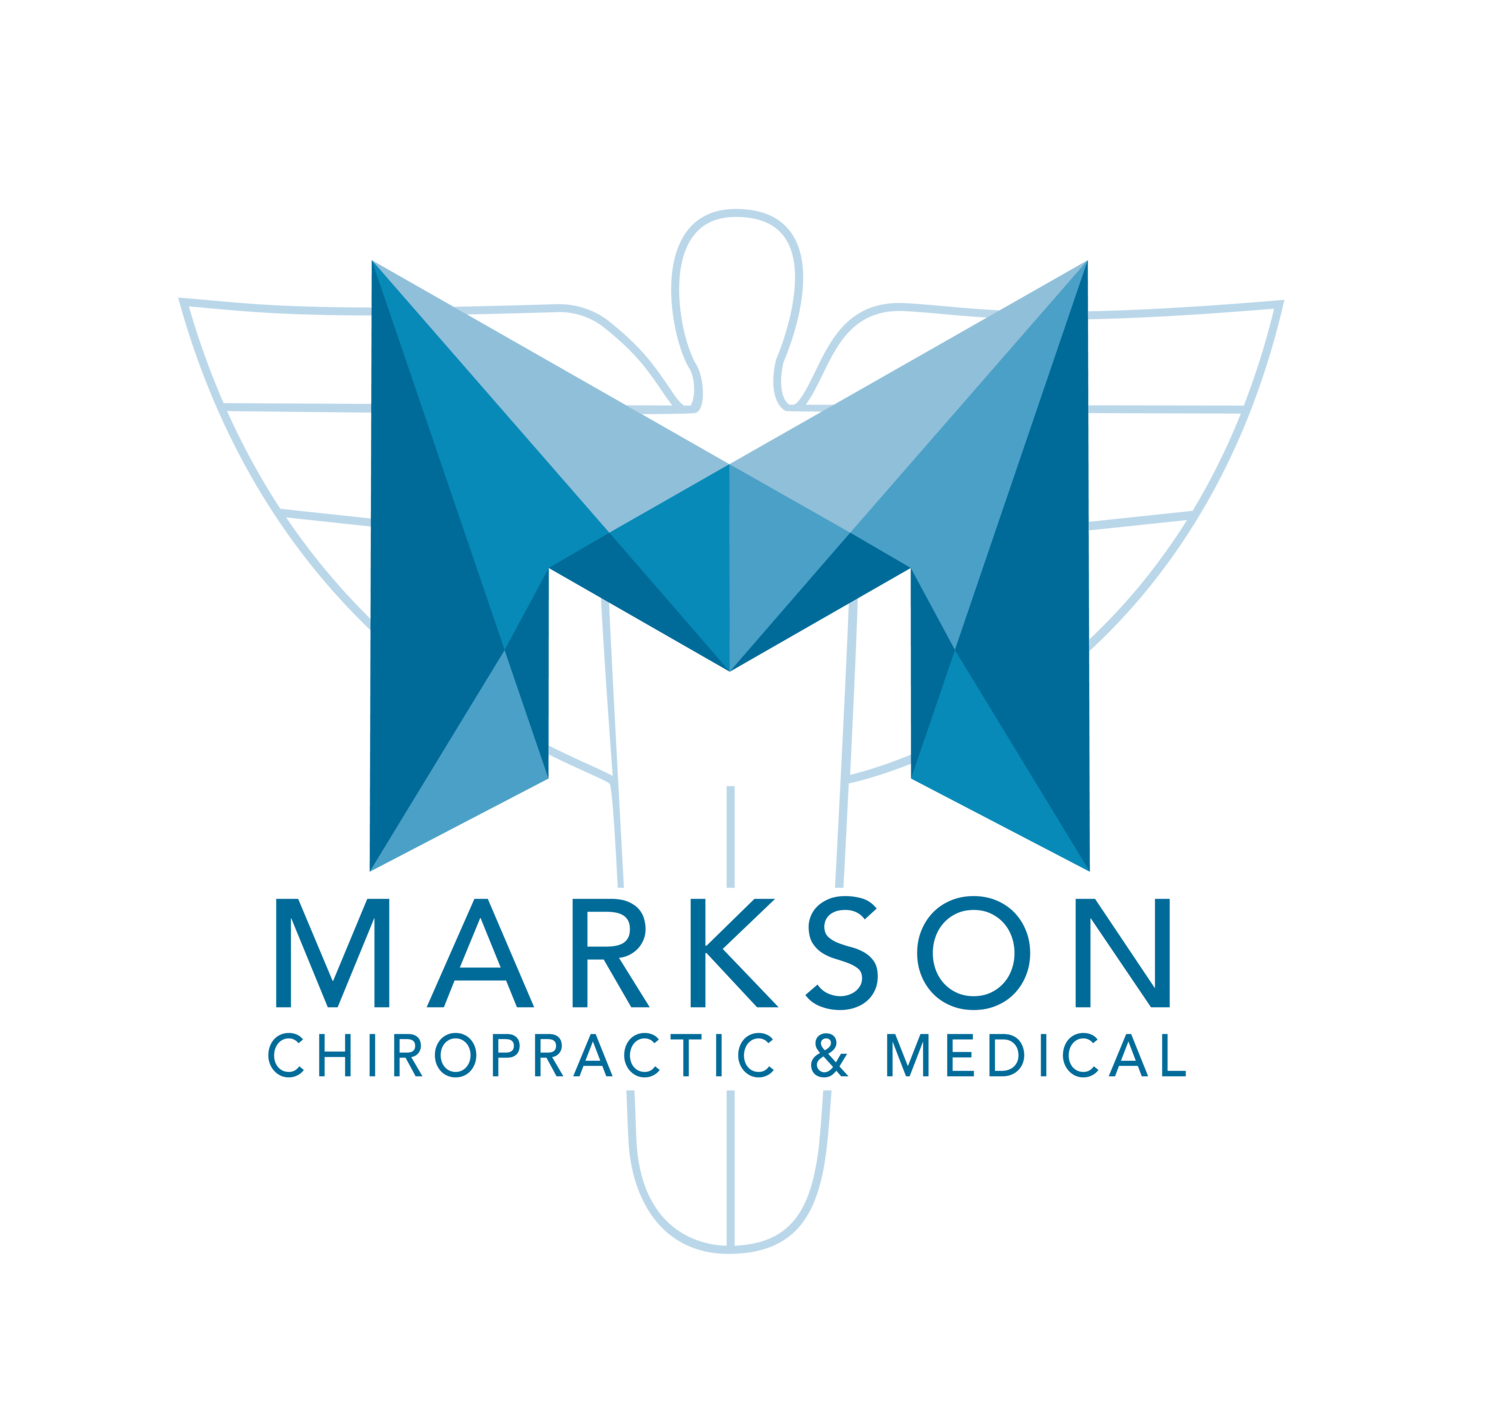 Markson Chiropractic